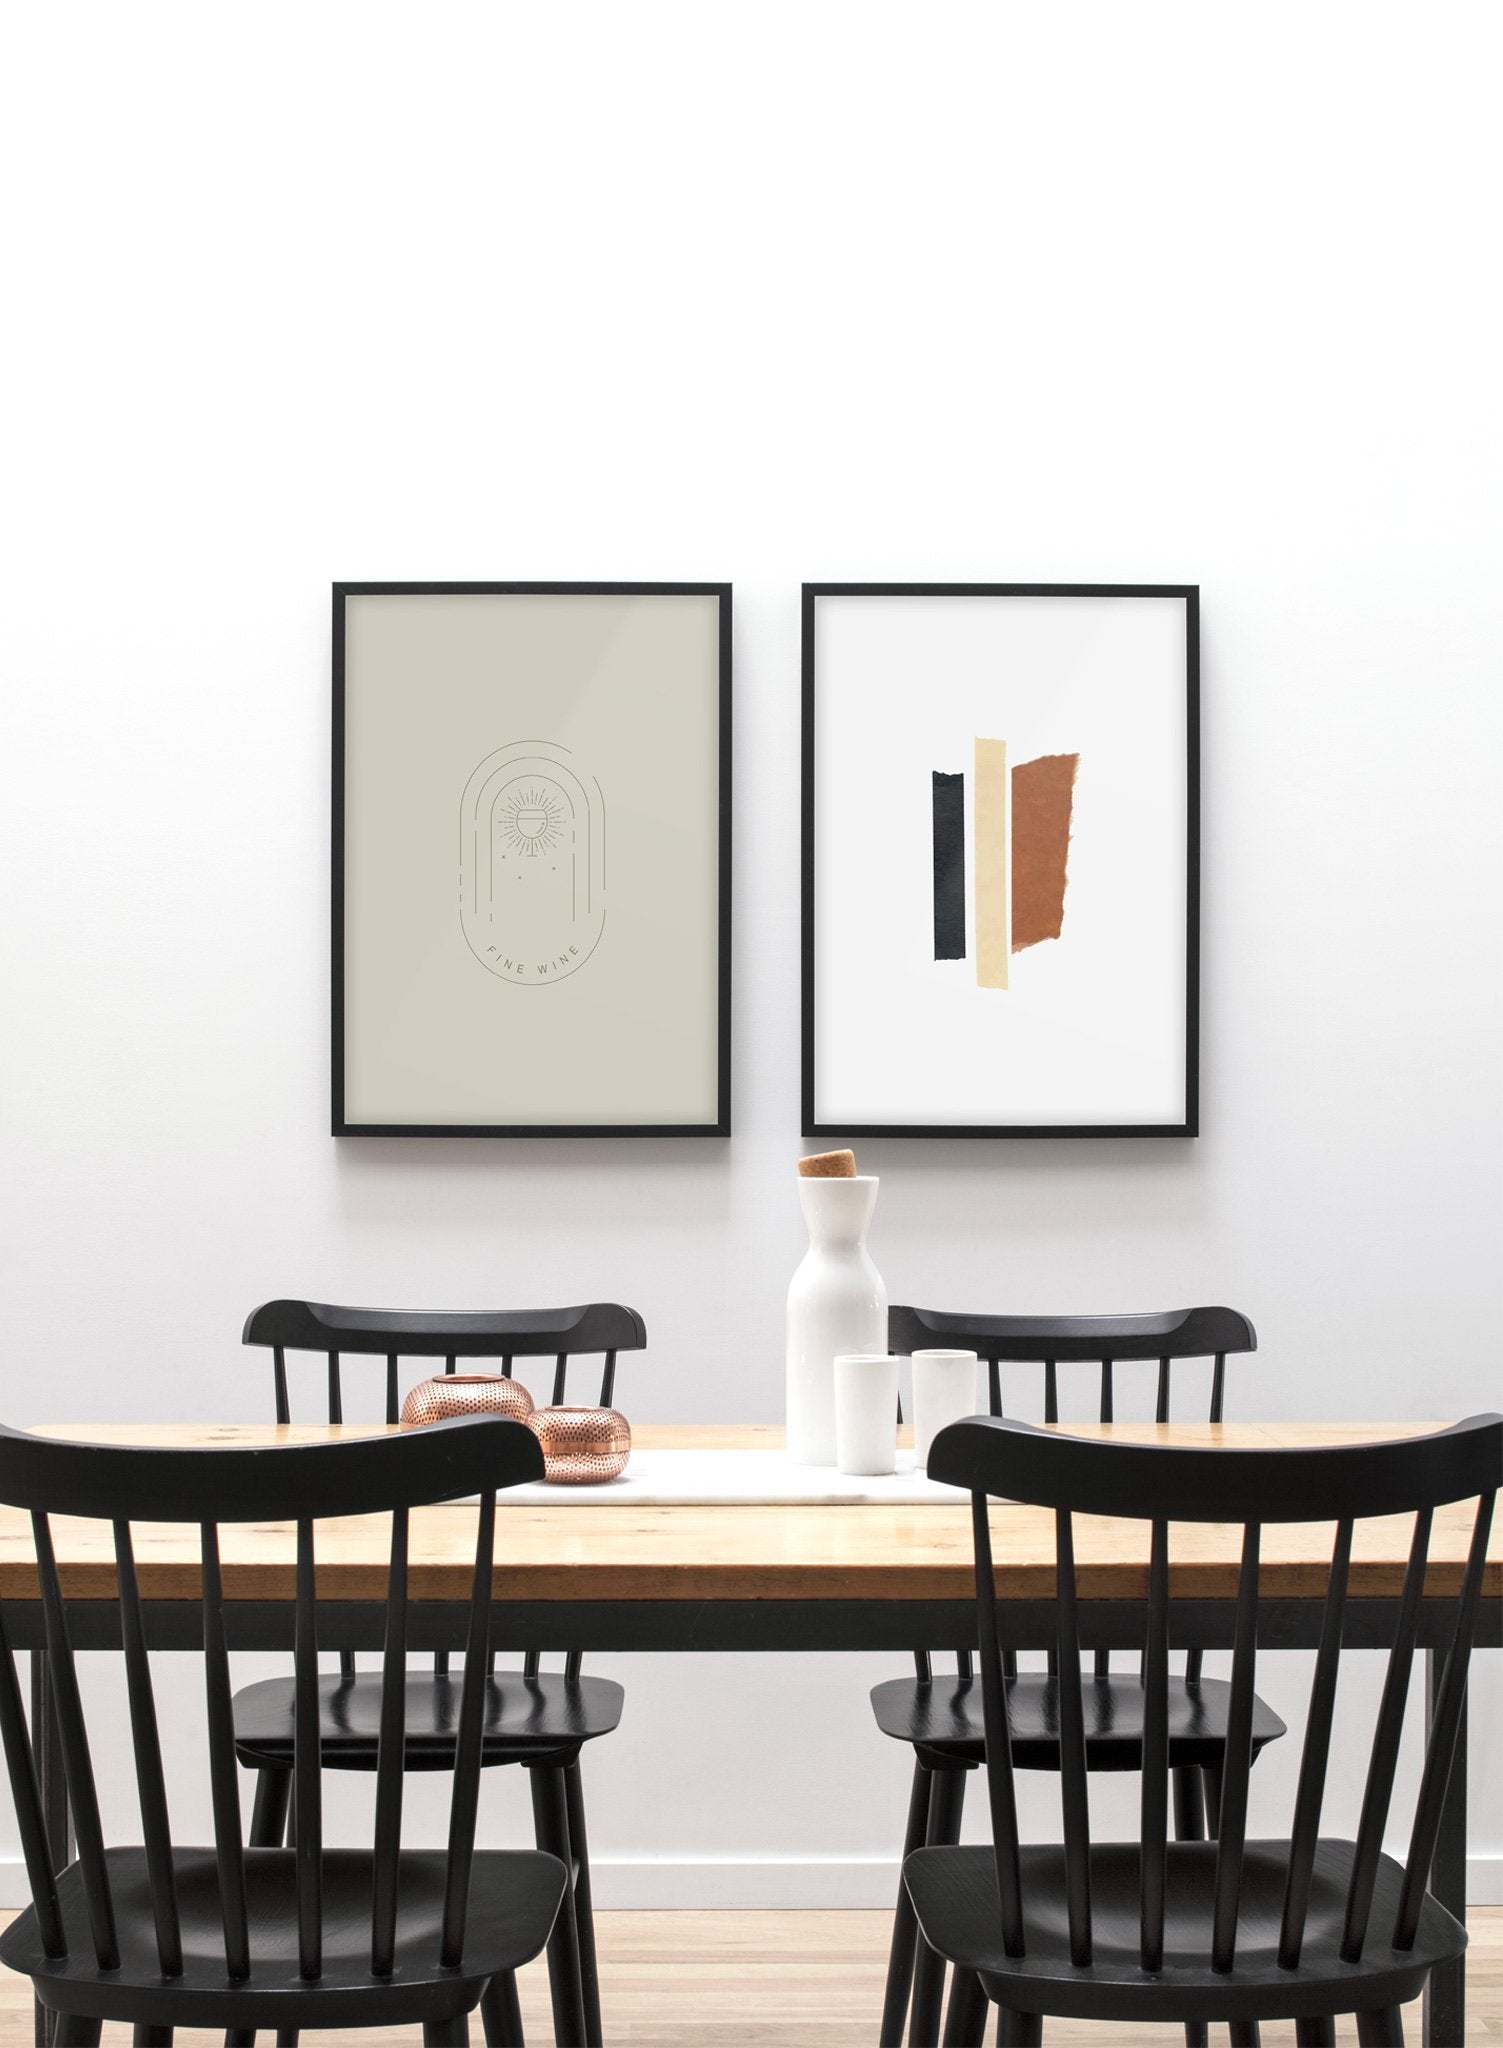 Fine Wine modern minimalist abstract design poster by Opposite Wall - Dining Room